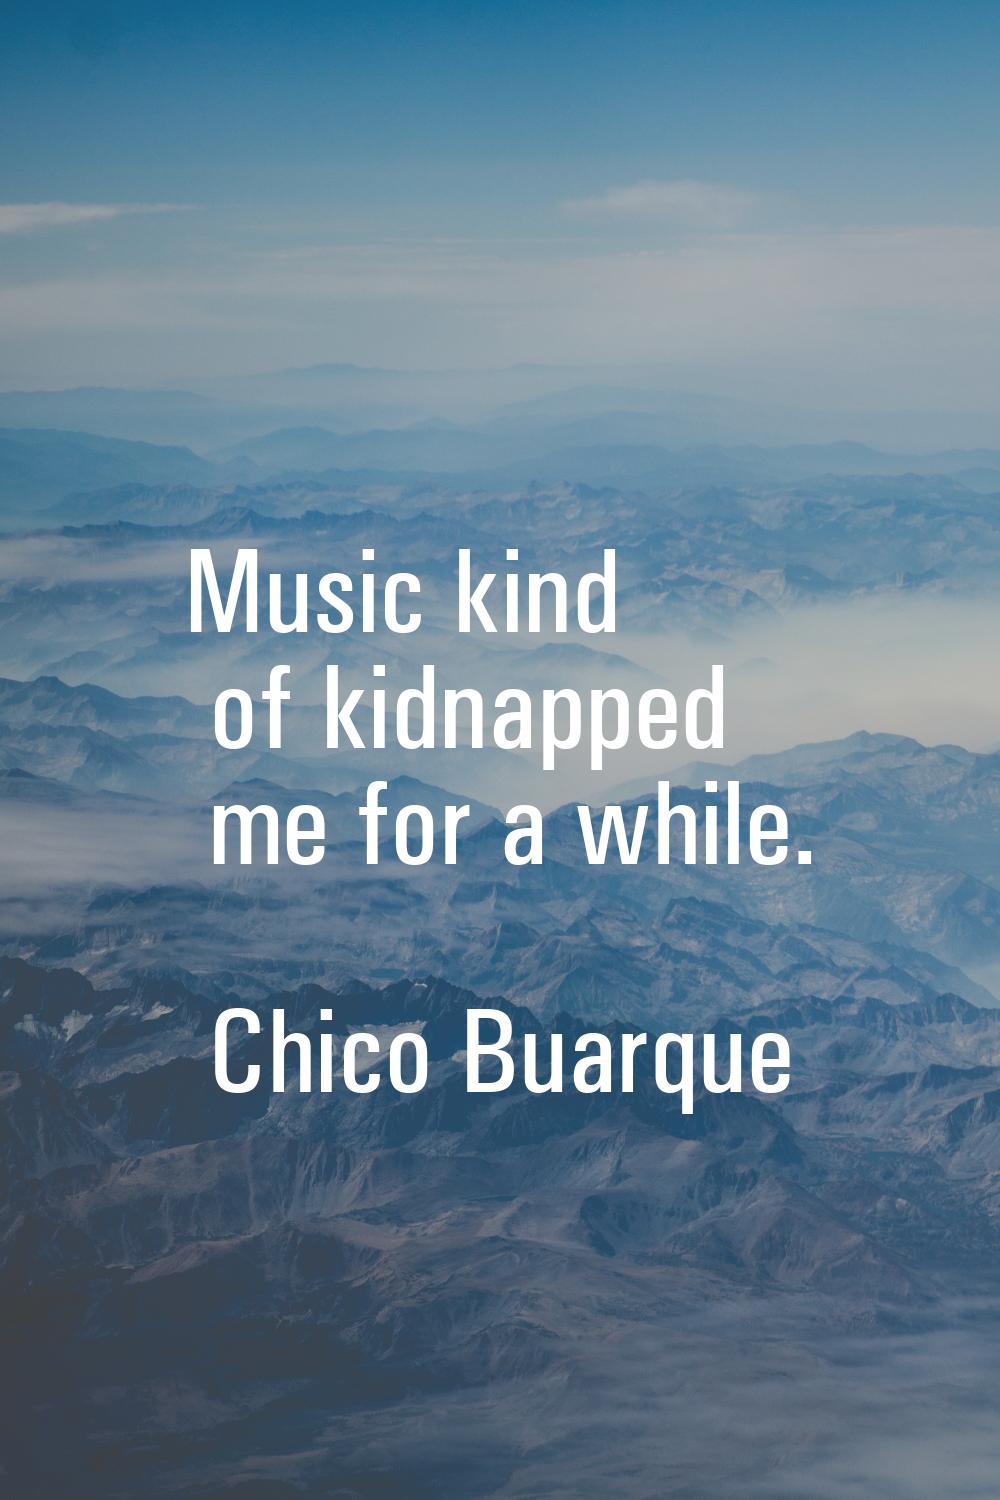 Music kind of kidnapped me for a while.